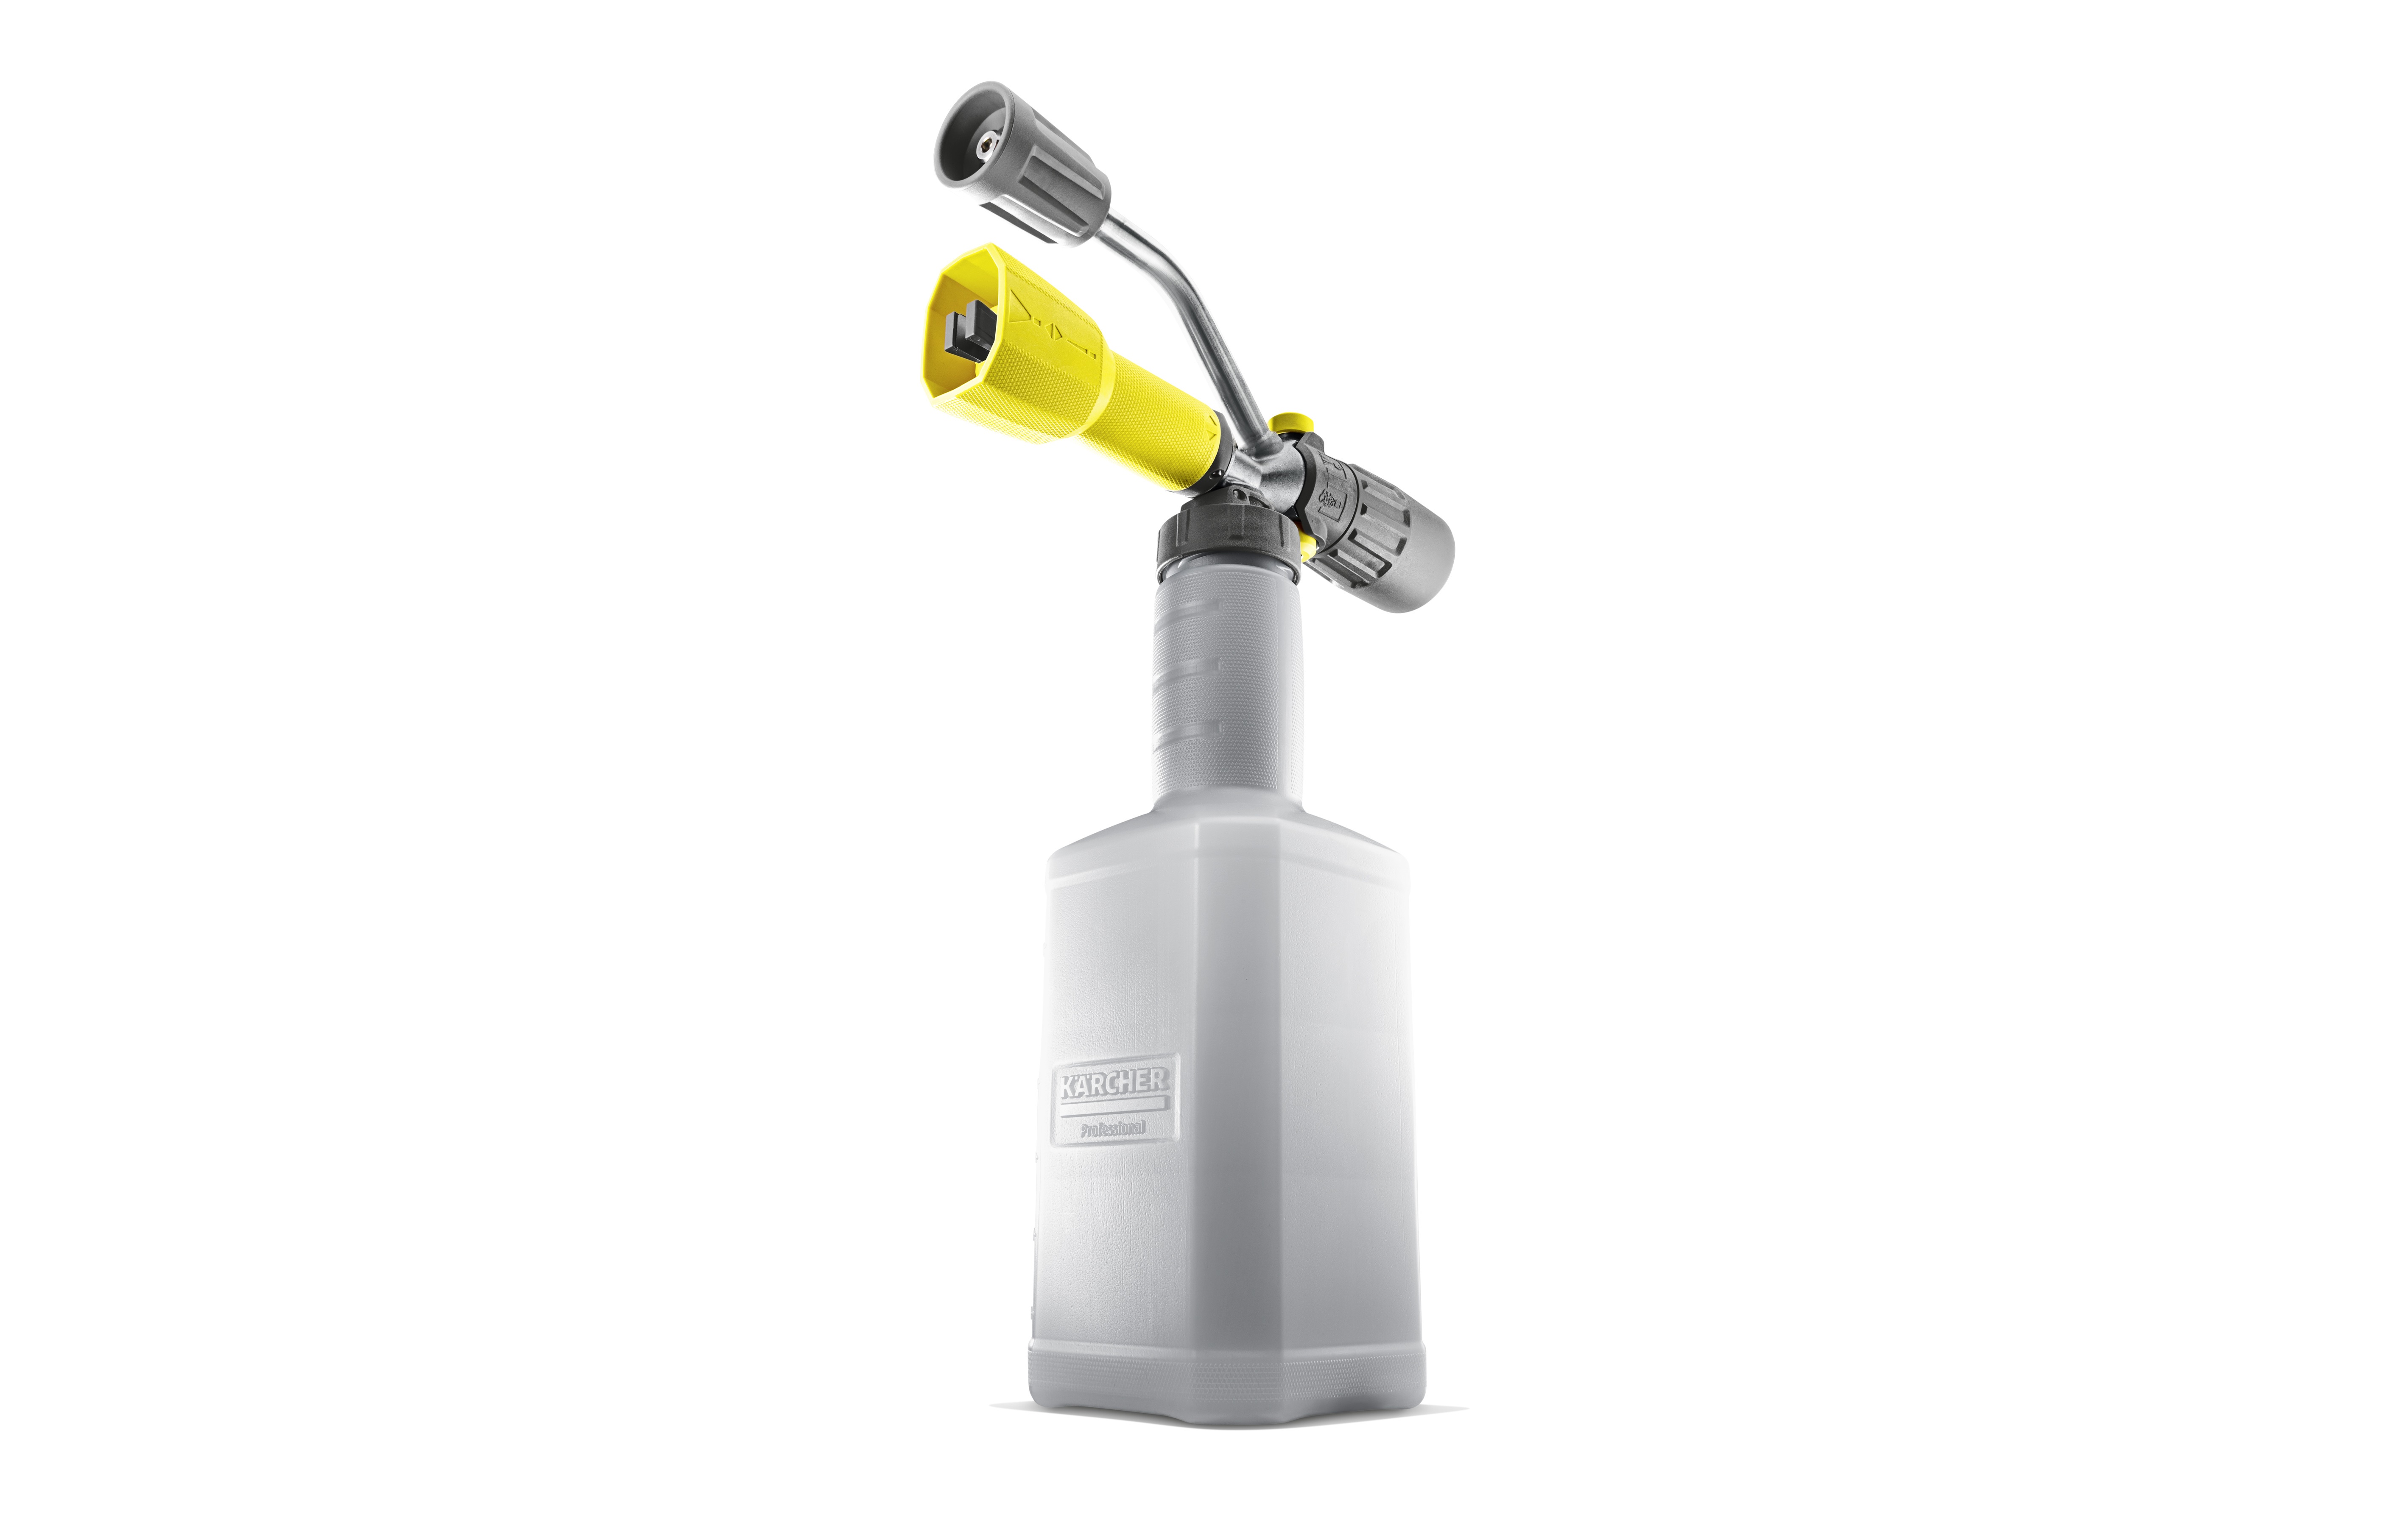 Without having to change the spray lance, the DUO Advanced cup foam lance can change from foam to high-pressure jet. 